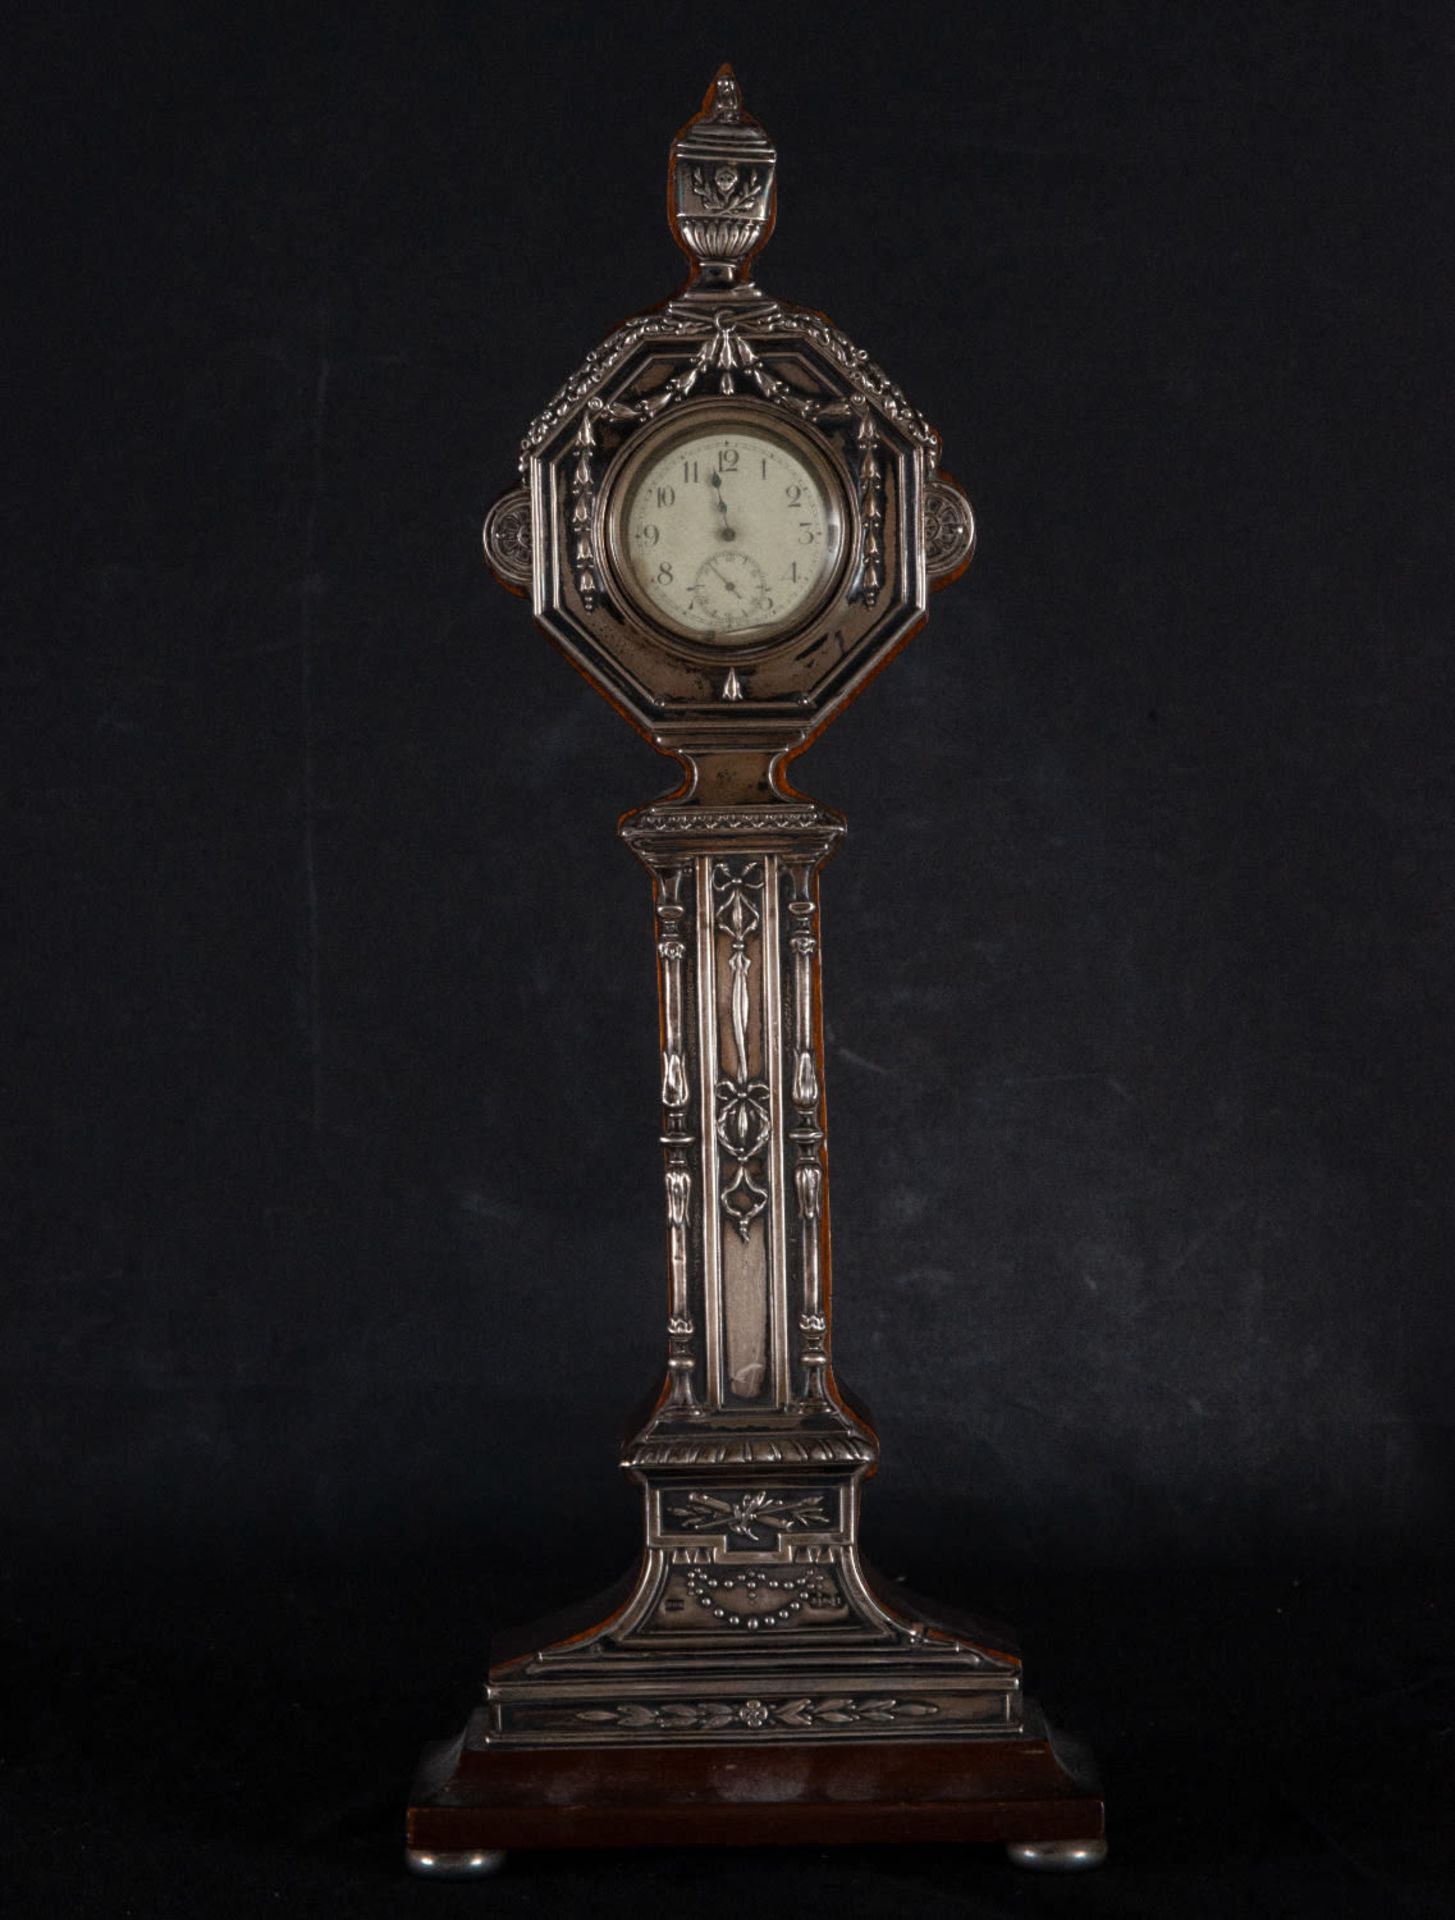 Mahogany clock covered with embossed silver, 19th century